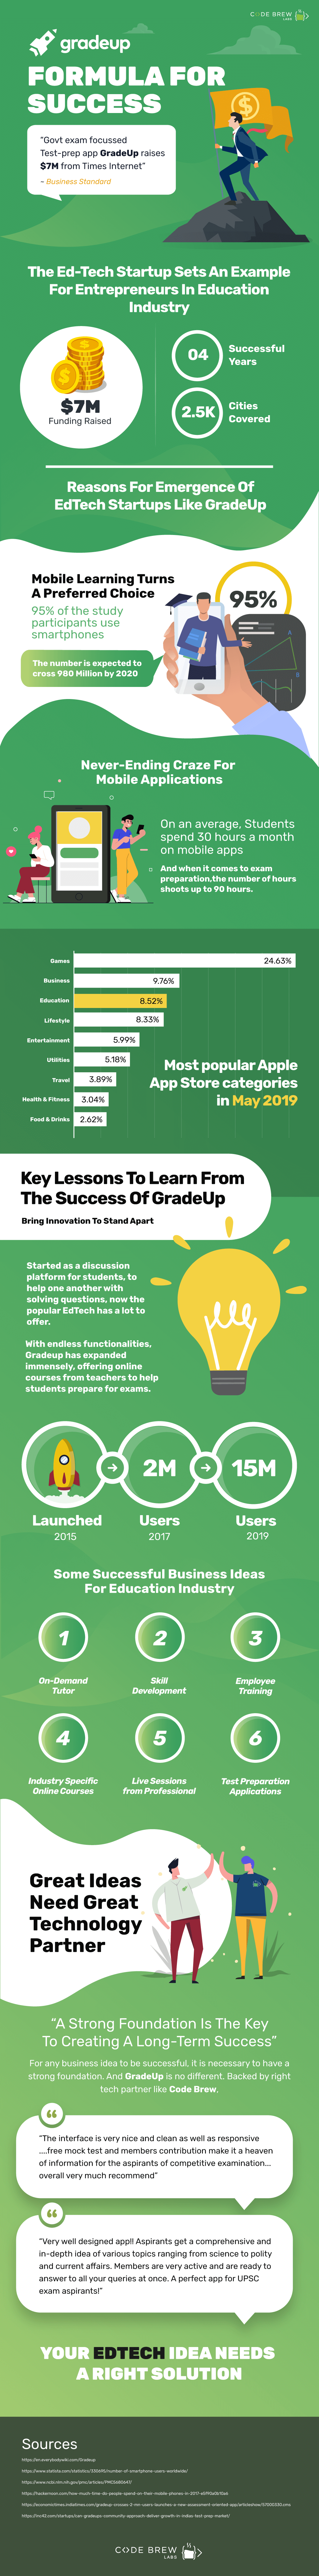 Things You Need to Learn From Gradeup’s $7M Fund Raising